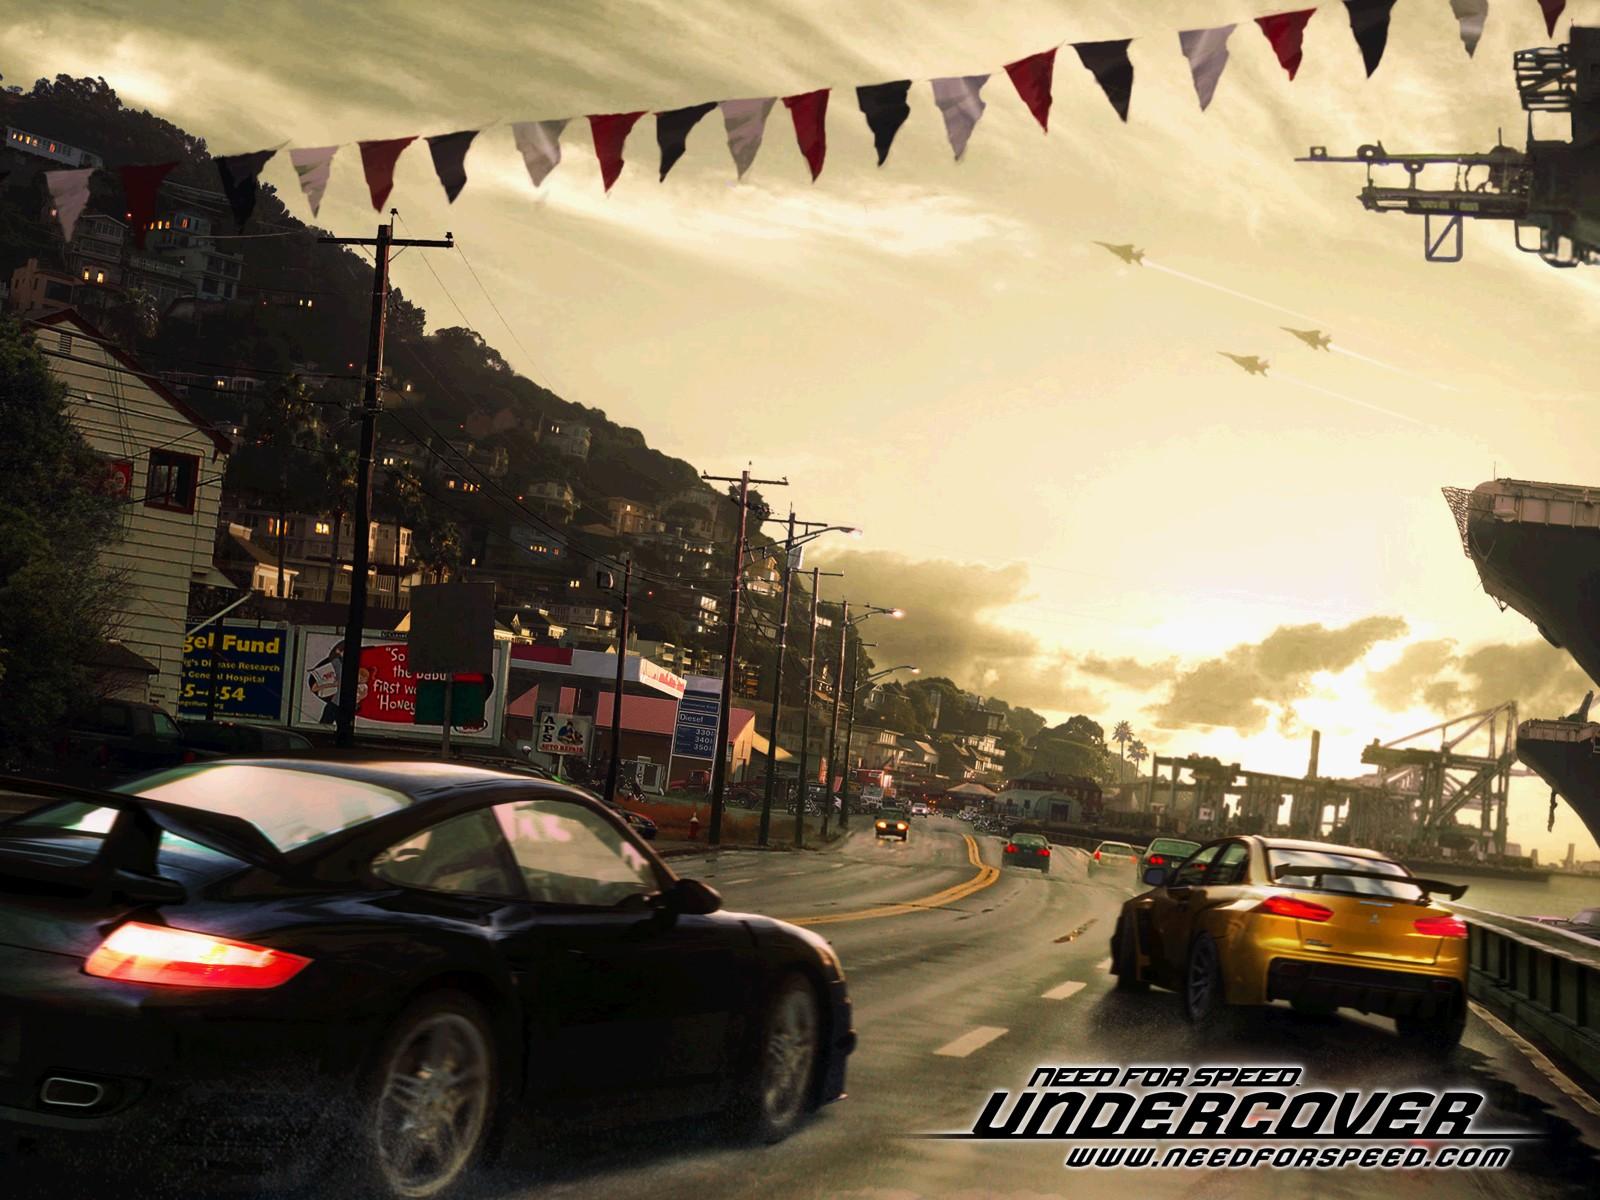 Image Need for Speed Need for Speed Undercover Games vdeo game